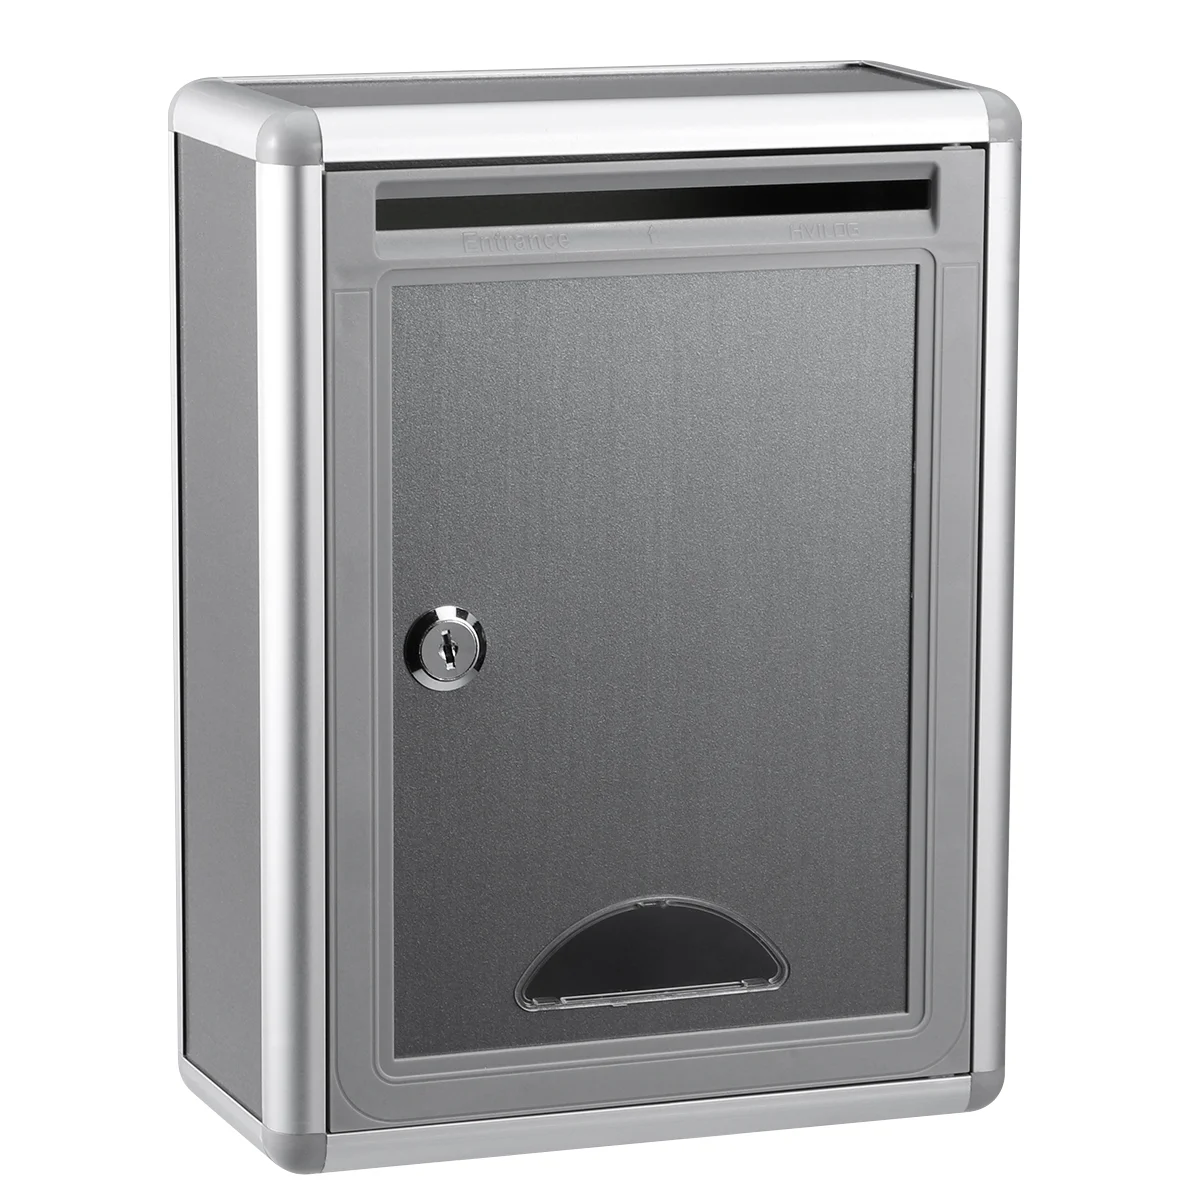 

Box Suggestion Wall Mailbox Drop Lockmounted Locking Mail Donation Boxesmetal Post Hanging Ballot Mount Letter Steel Stainless